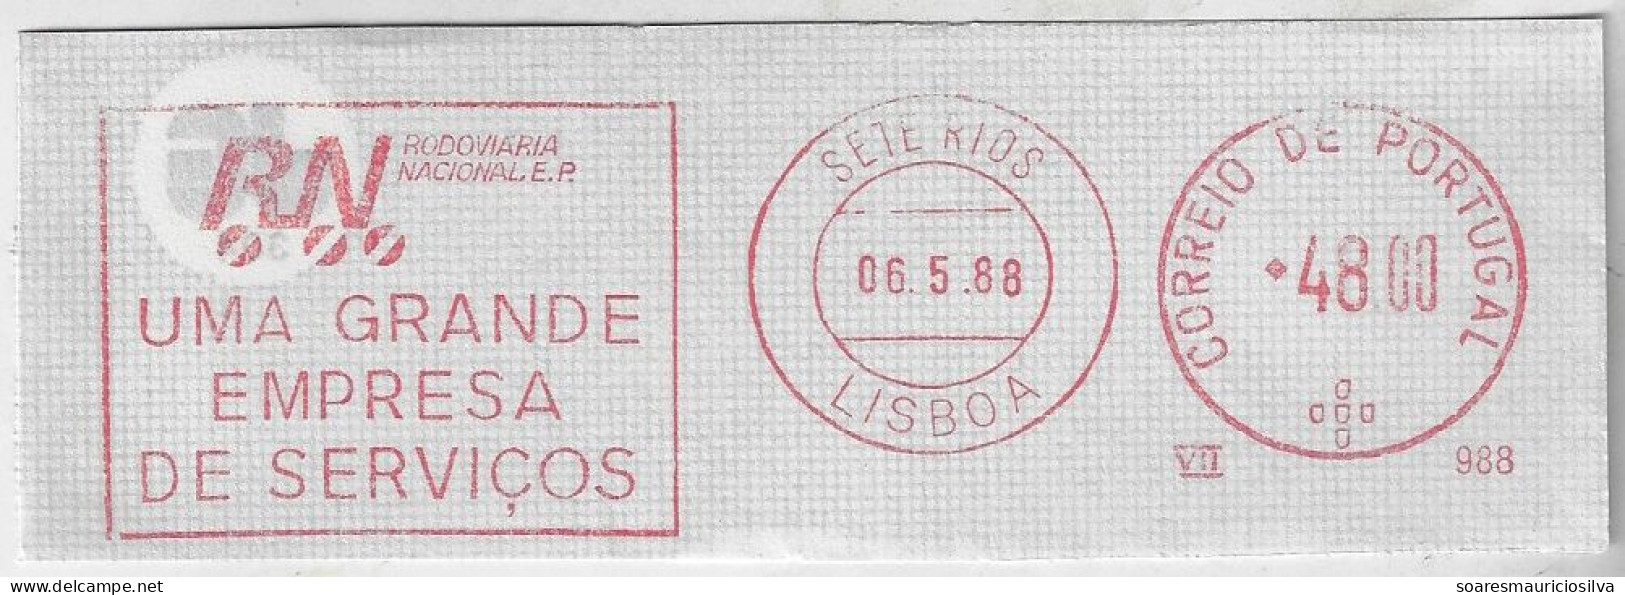 Portugal 1988 Cover Fragment Meter Stamp Francotyp Slogan National Road Co. From Lisbon Sete Rios Agency Transport Bus - Bus